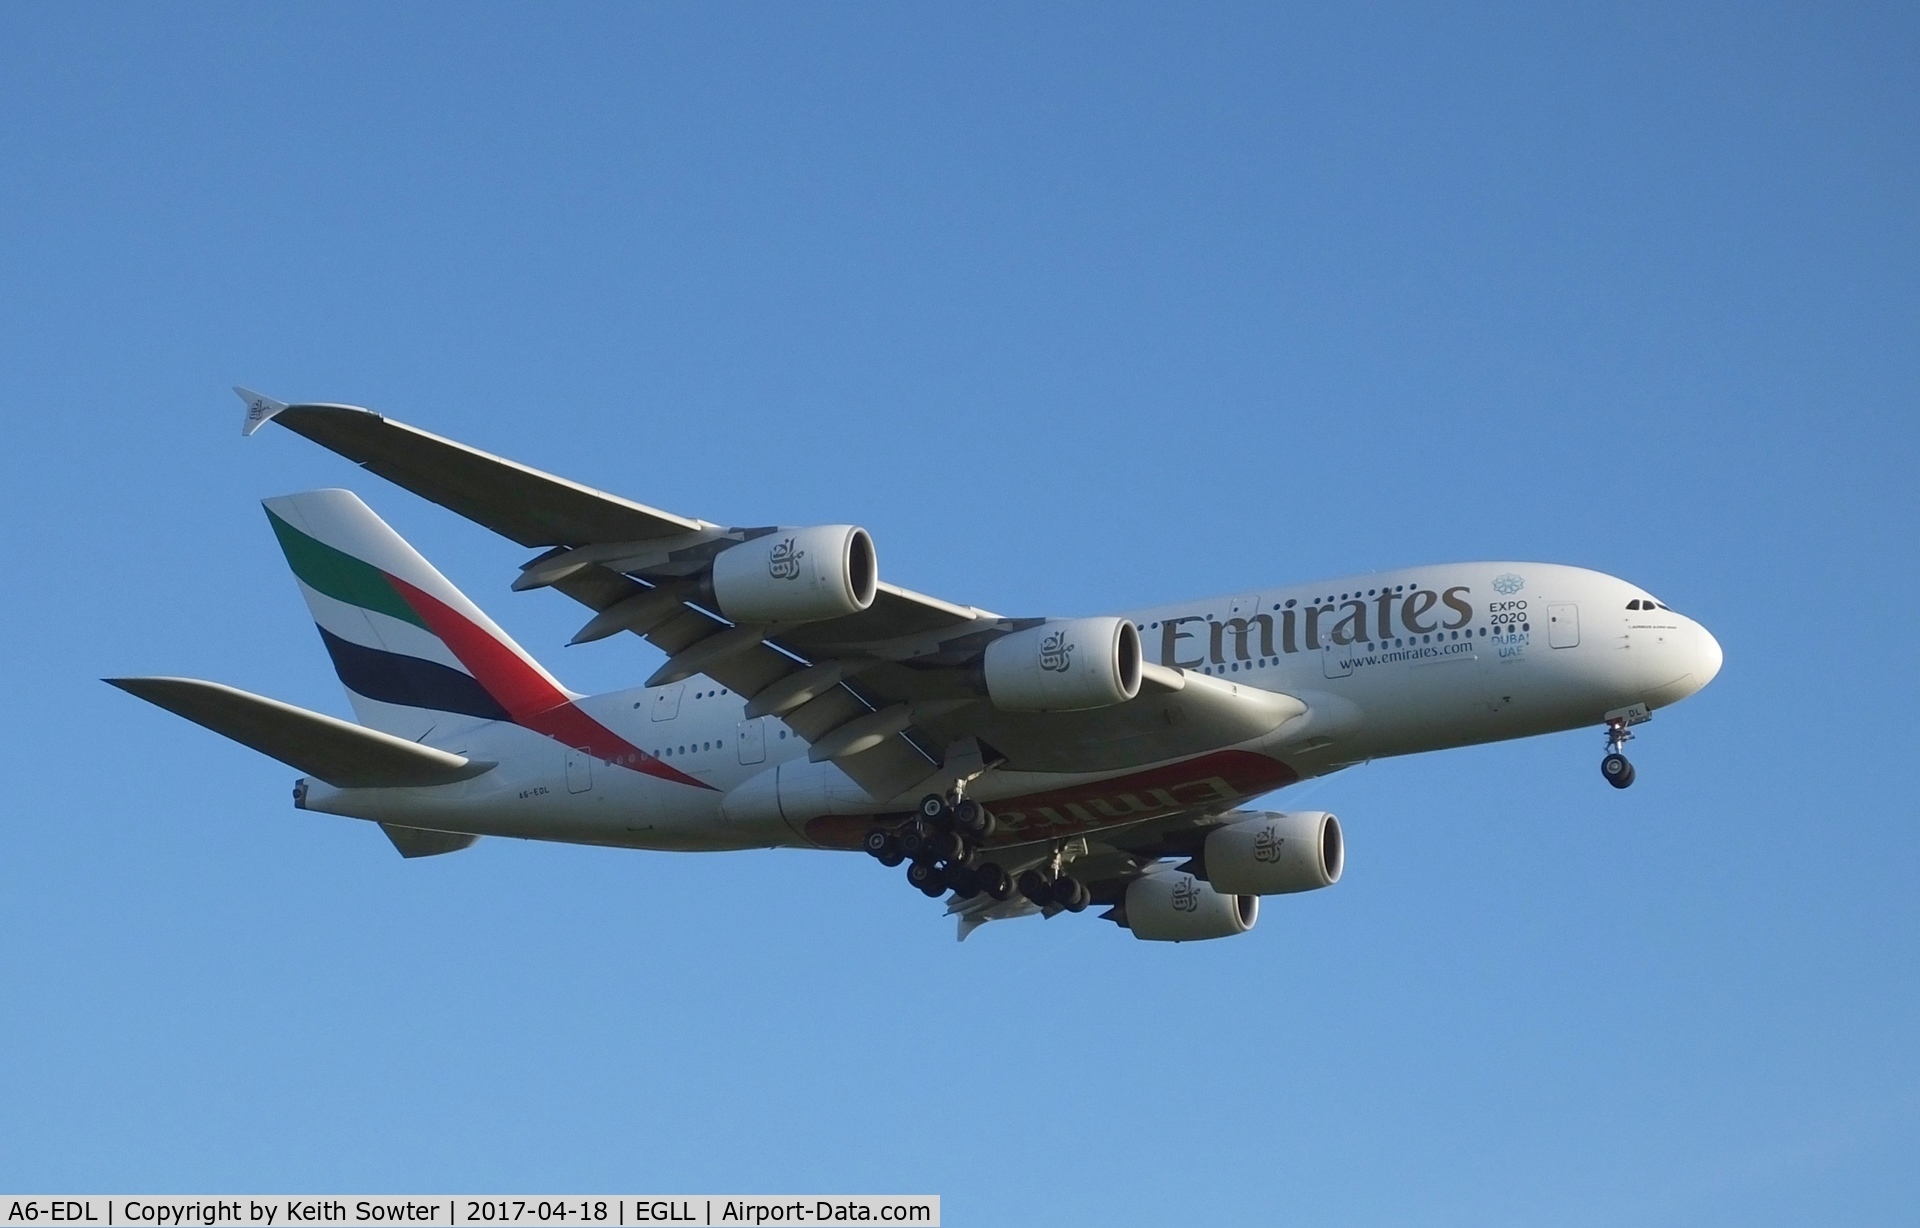 A6-EDL, 2010 Airbus A380-861 C/N 046, Short finals to land on runway 09L at Heathrow